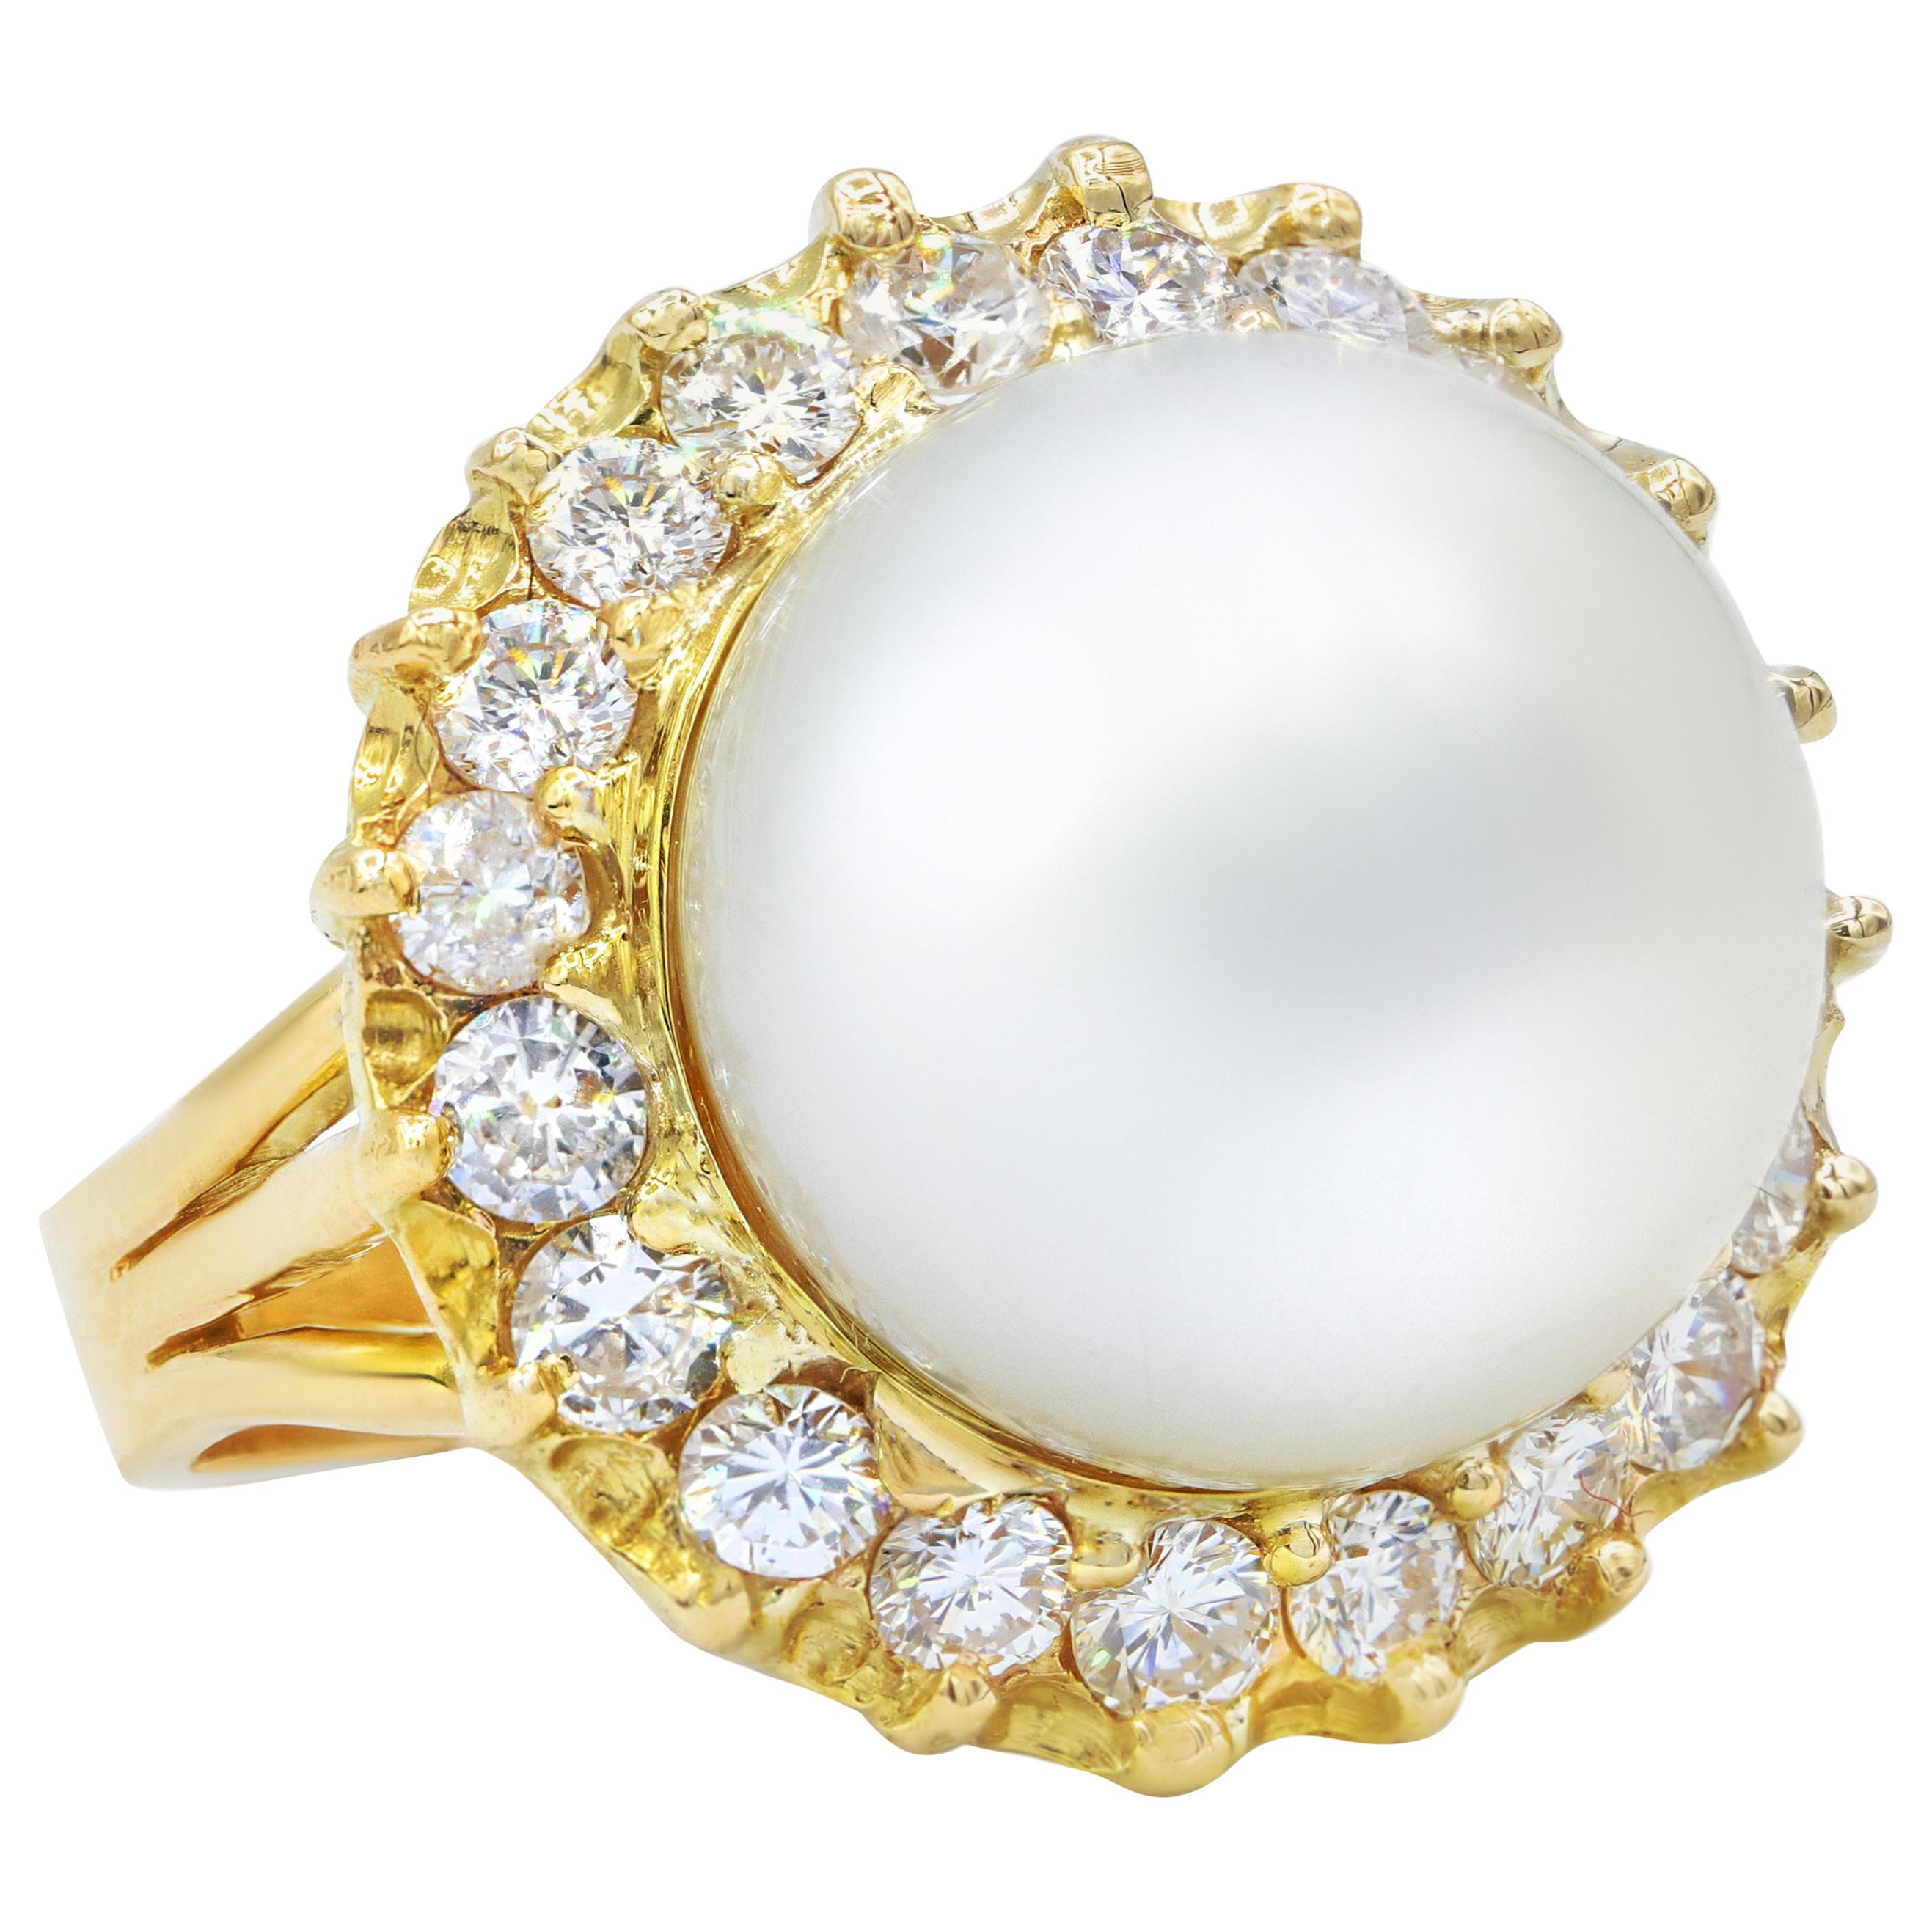 14mm white Pearl and Diamond Ring